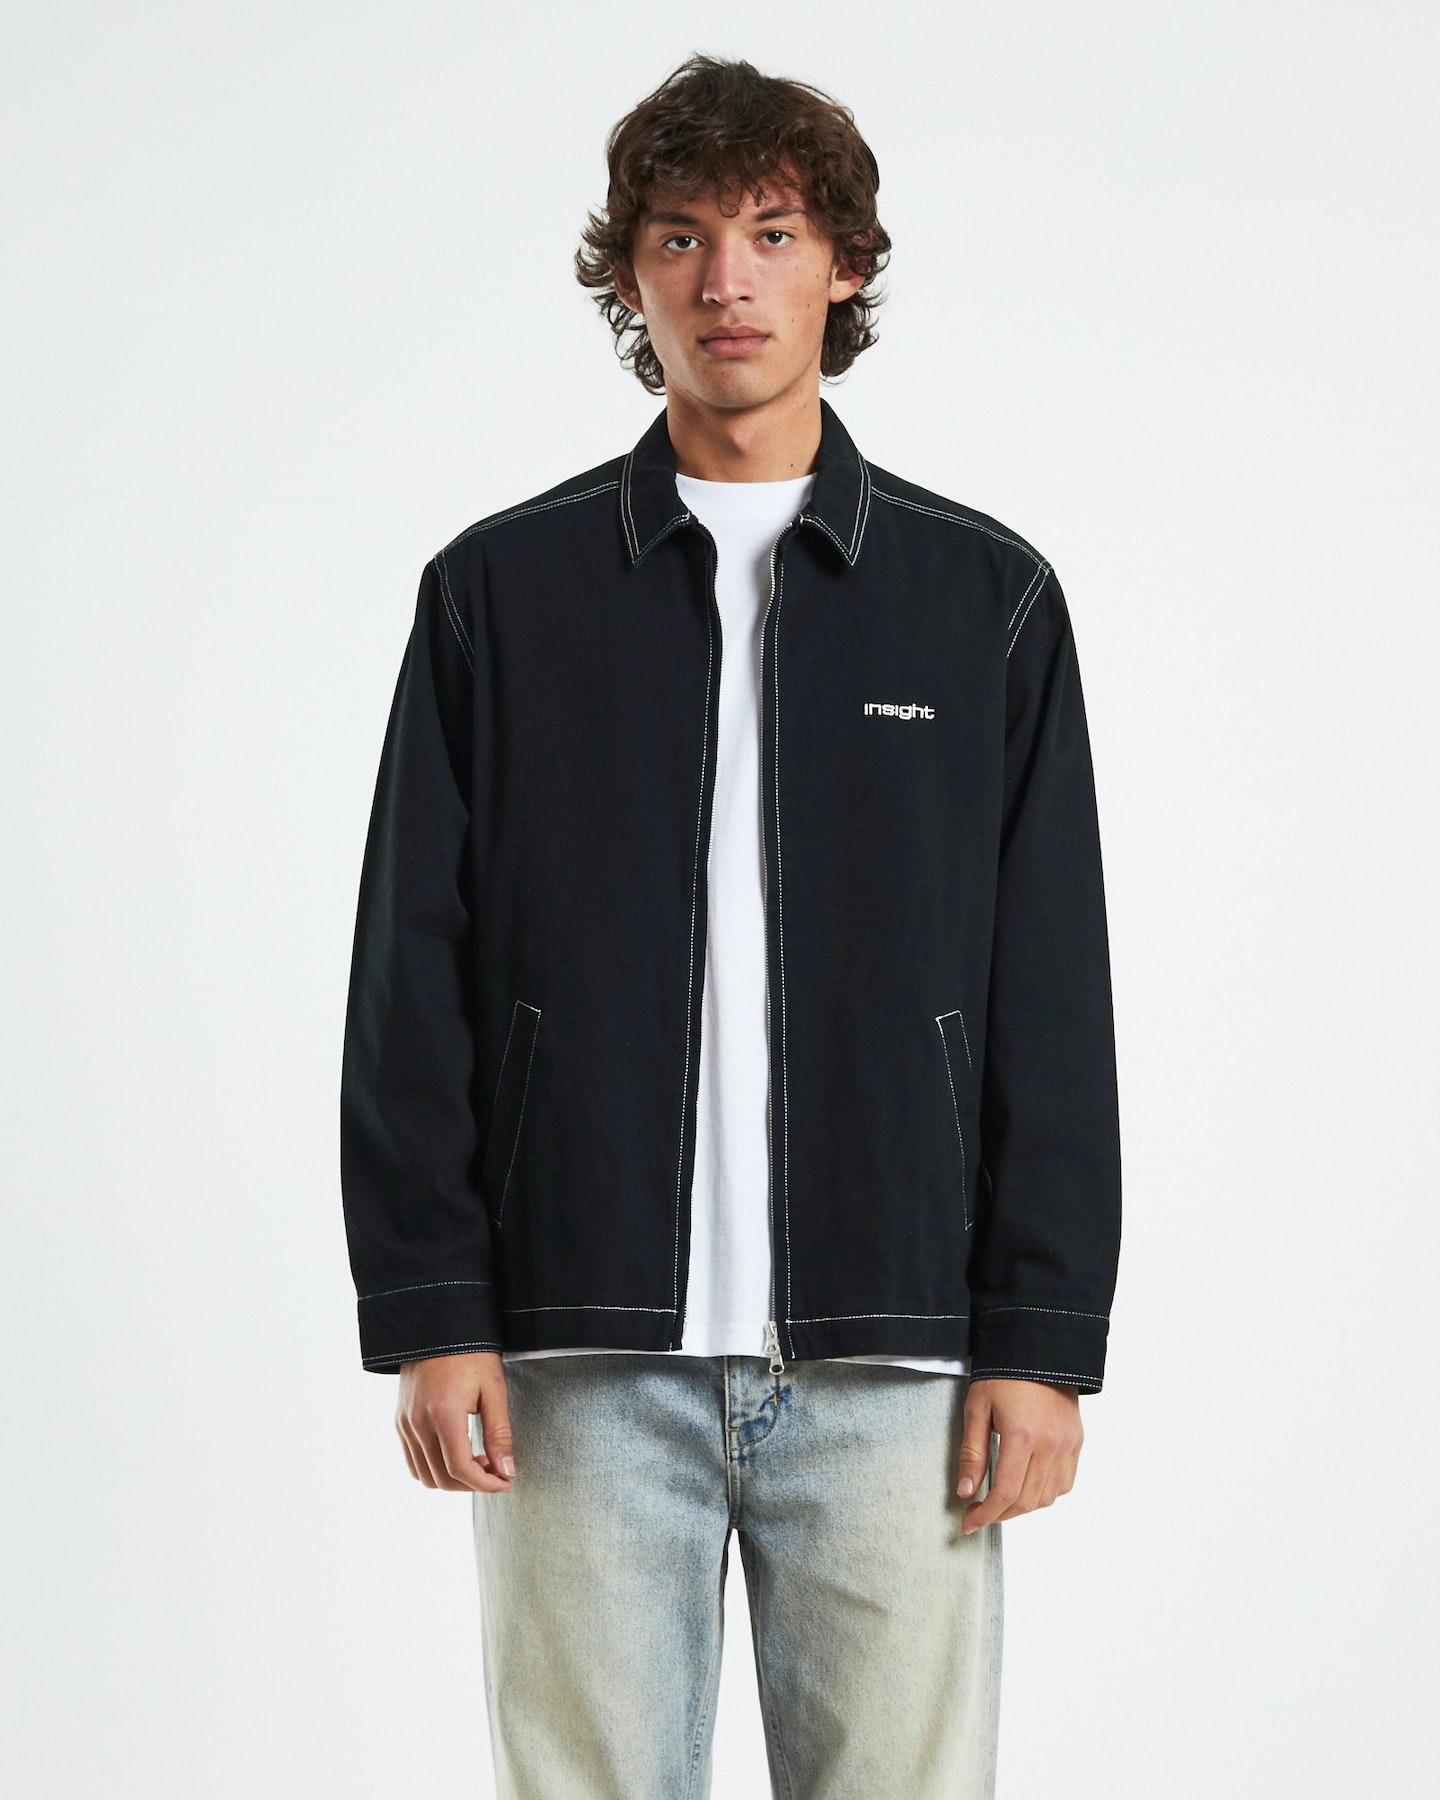 Insight Spinners Jacket - Black | SurfStitch